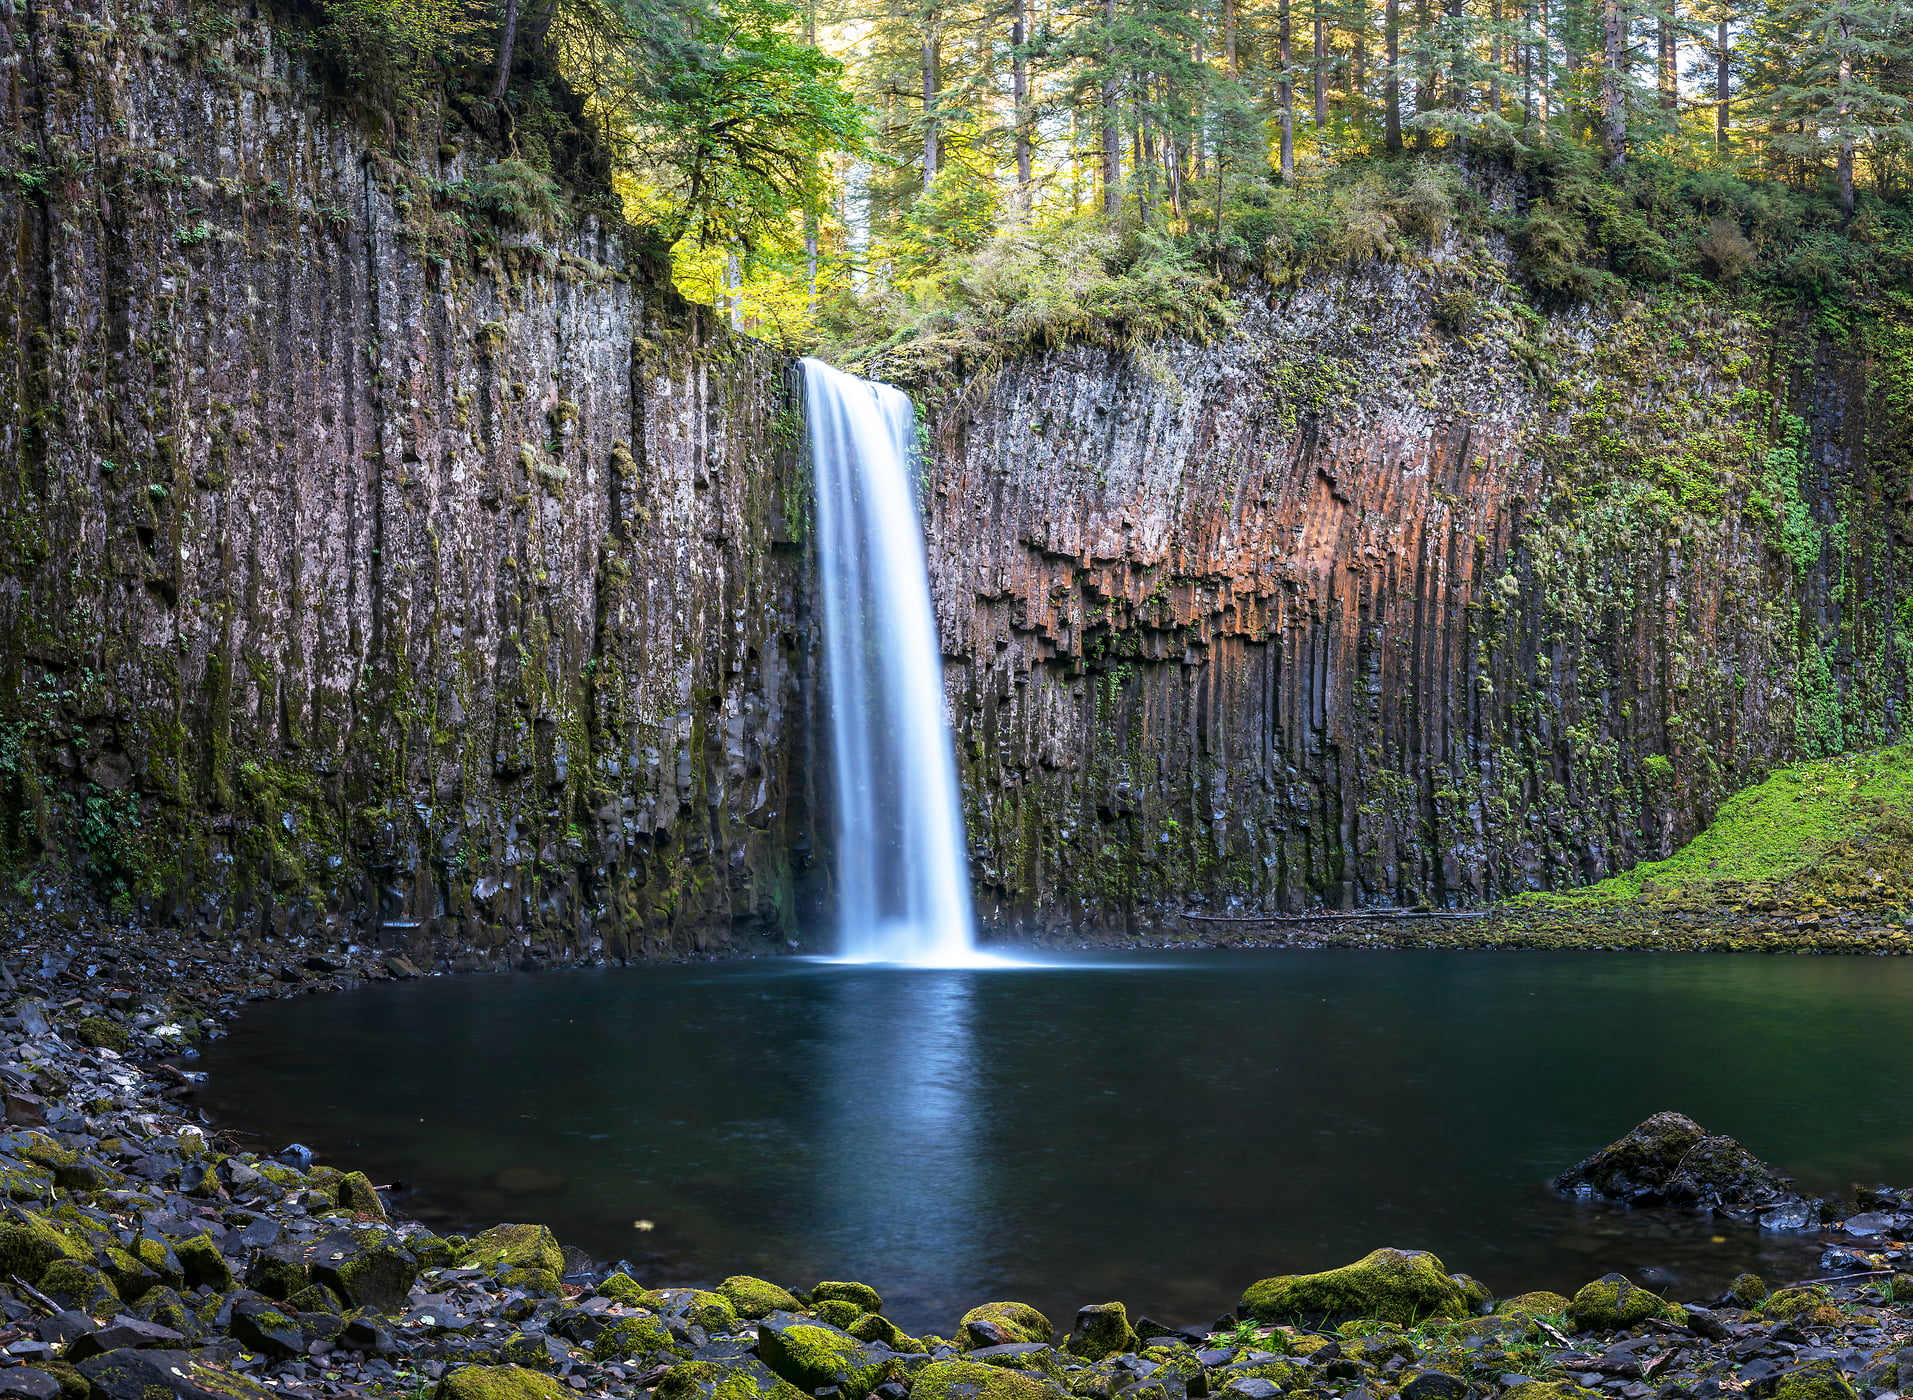 607 megapixels! A very high resolution, large-format VAST photo print of Abiqua Falls waterfall in a forest; nature fine art print created by Justin Katz in Oregon